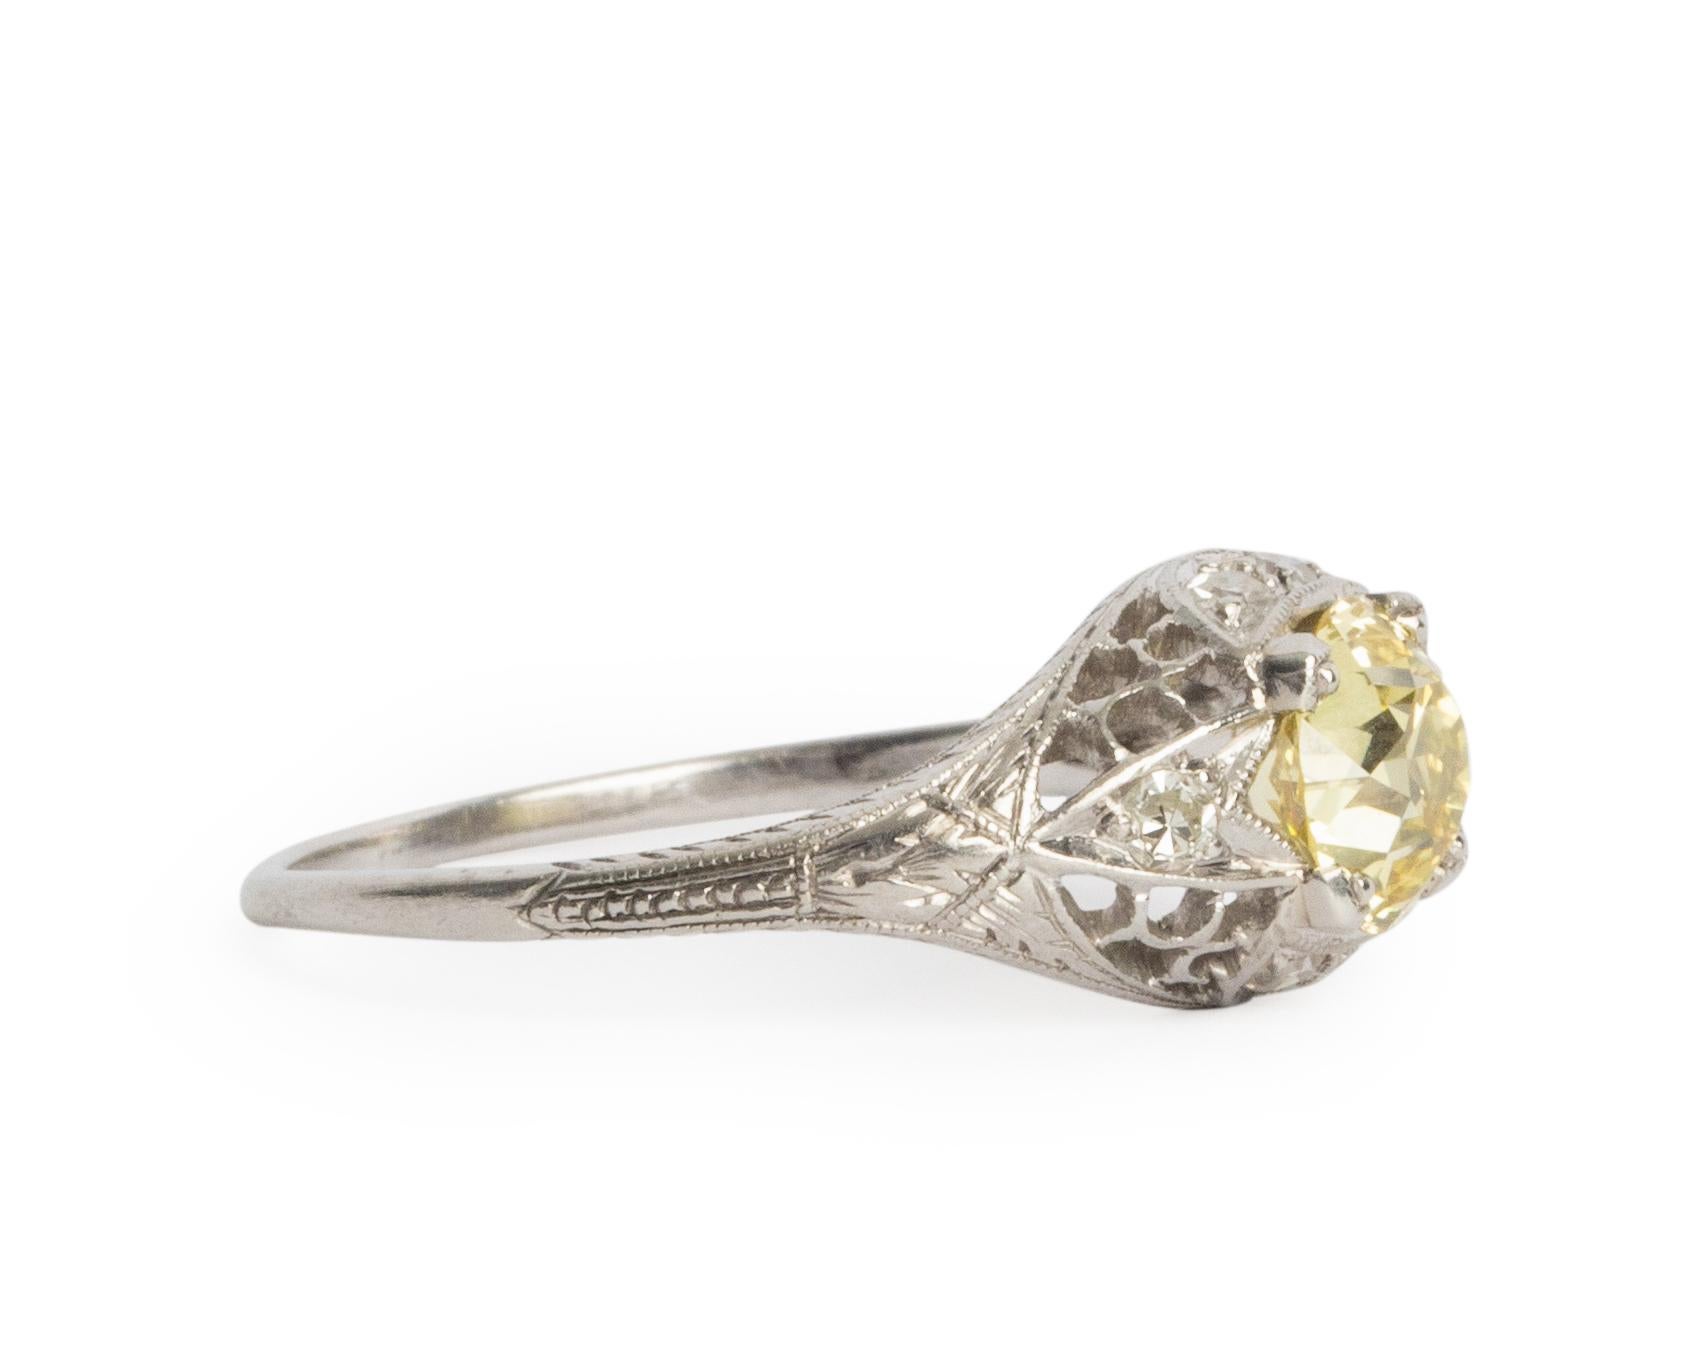 Ring Size: 8
Metal Type: Platinum  [Hallmarked, and Tested]
Weight:  3.5 grams

Center Diamond Details:
GIA REPORT#2201883948
Weight: 1.25 carat
Cut: Old European Brilliant
Color: Fancy Yellow, Natural
Clarity: VS1

Side Diamond Details:
Weight: .12